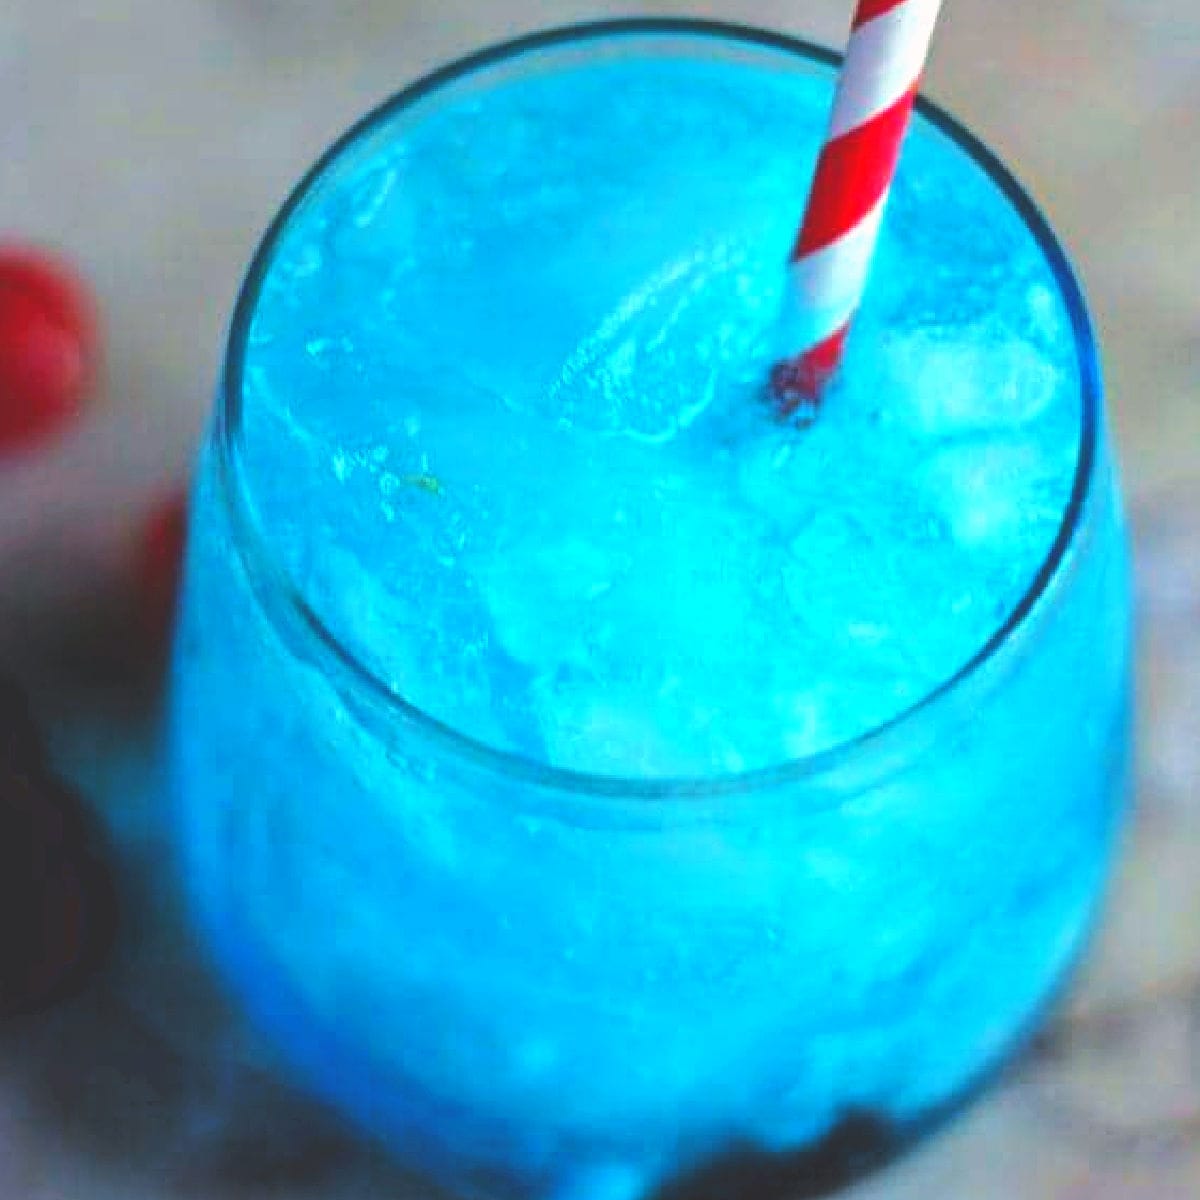 Blue vodka cocktail with a red and white straw.